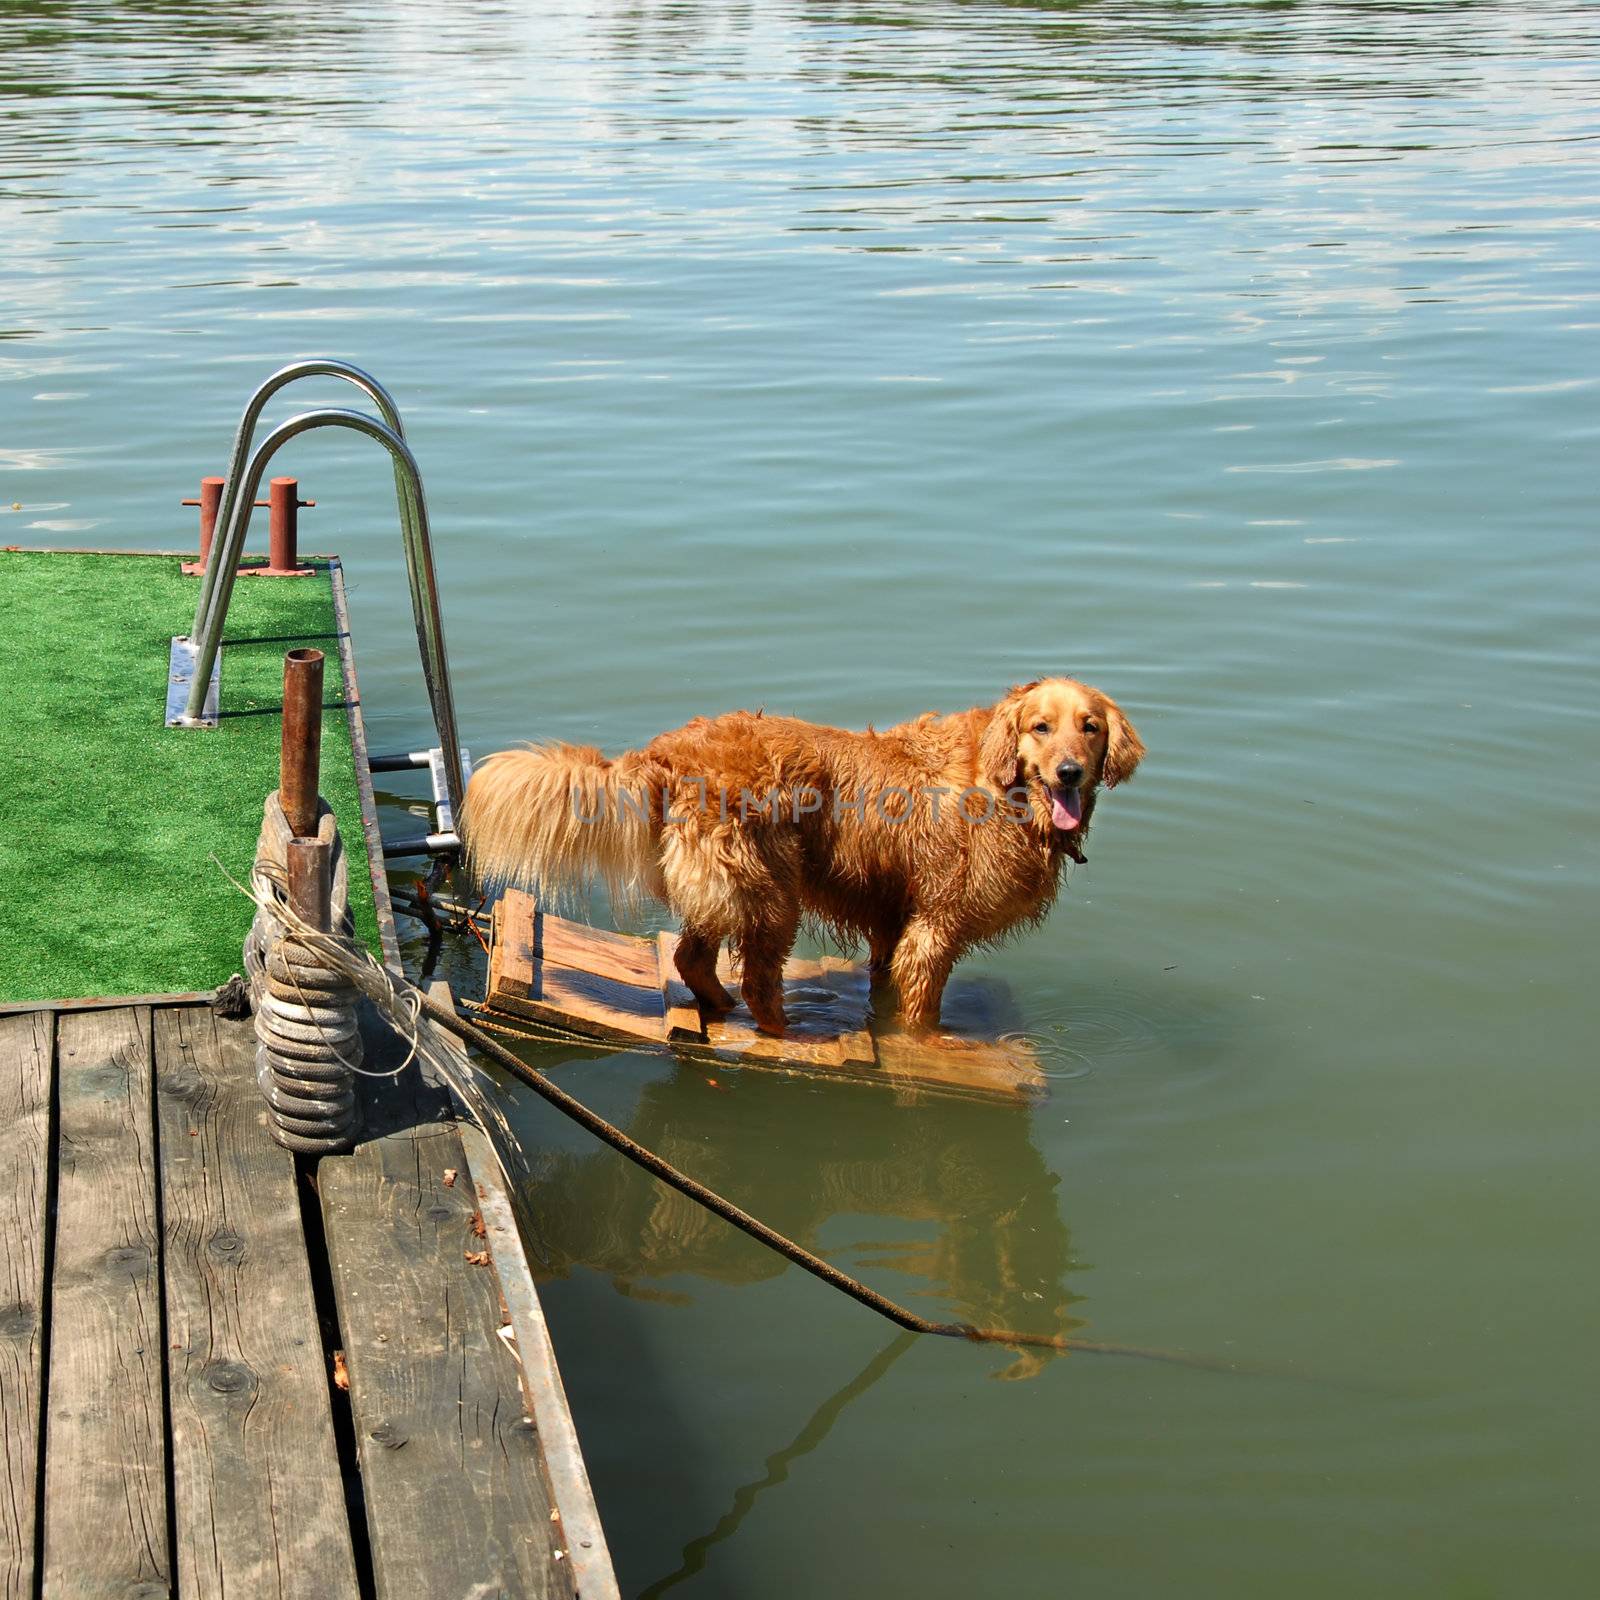 Golden retriever by water by simply